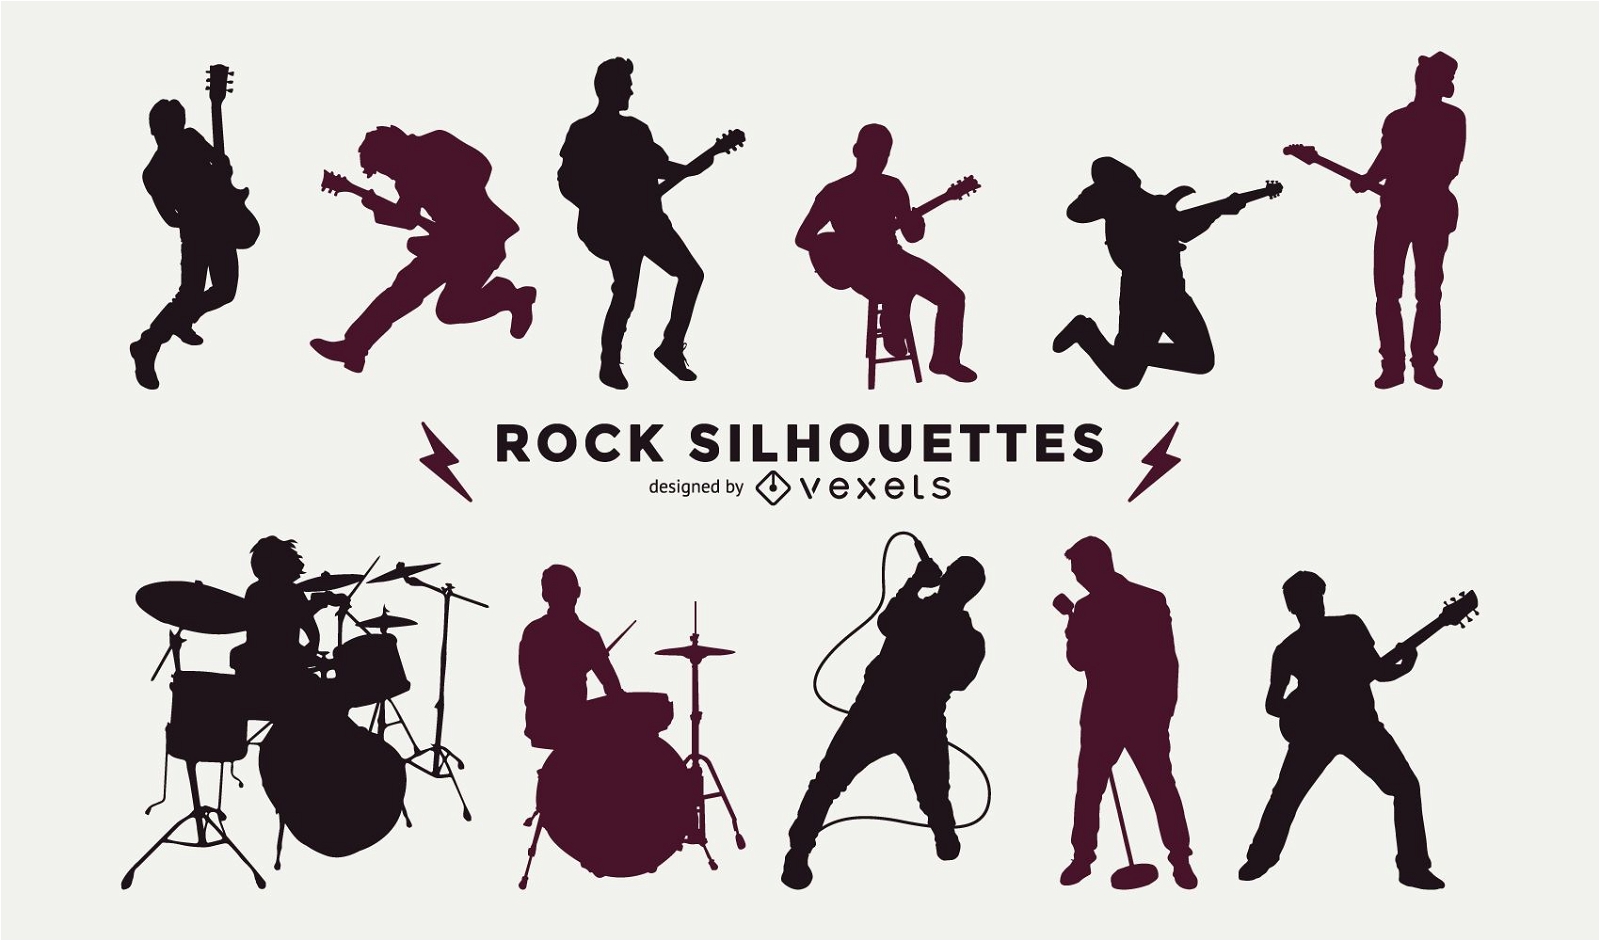 rock band silhouette vector free